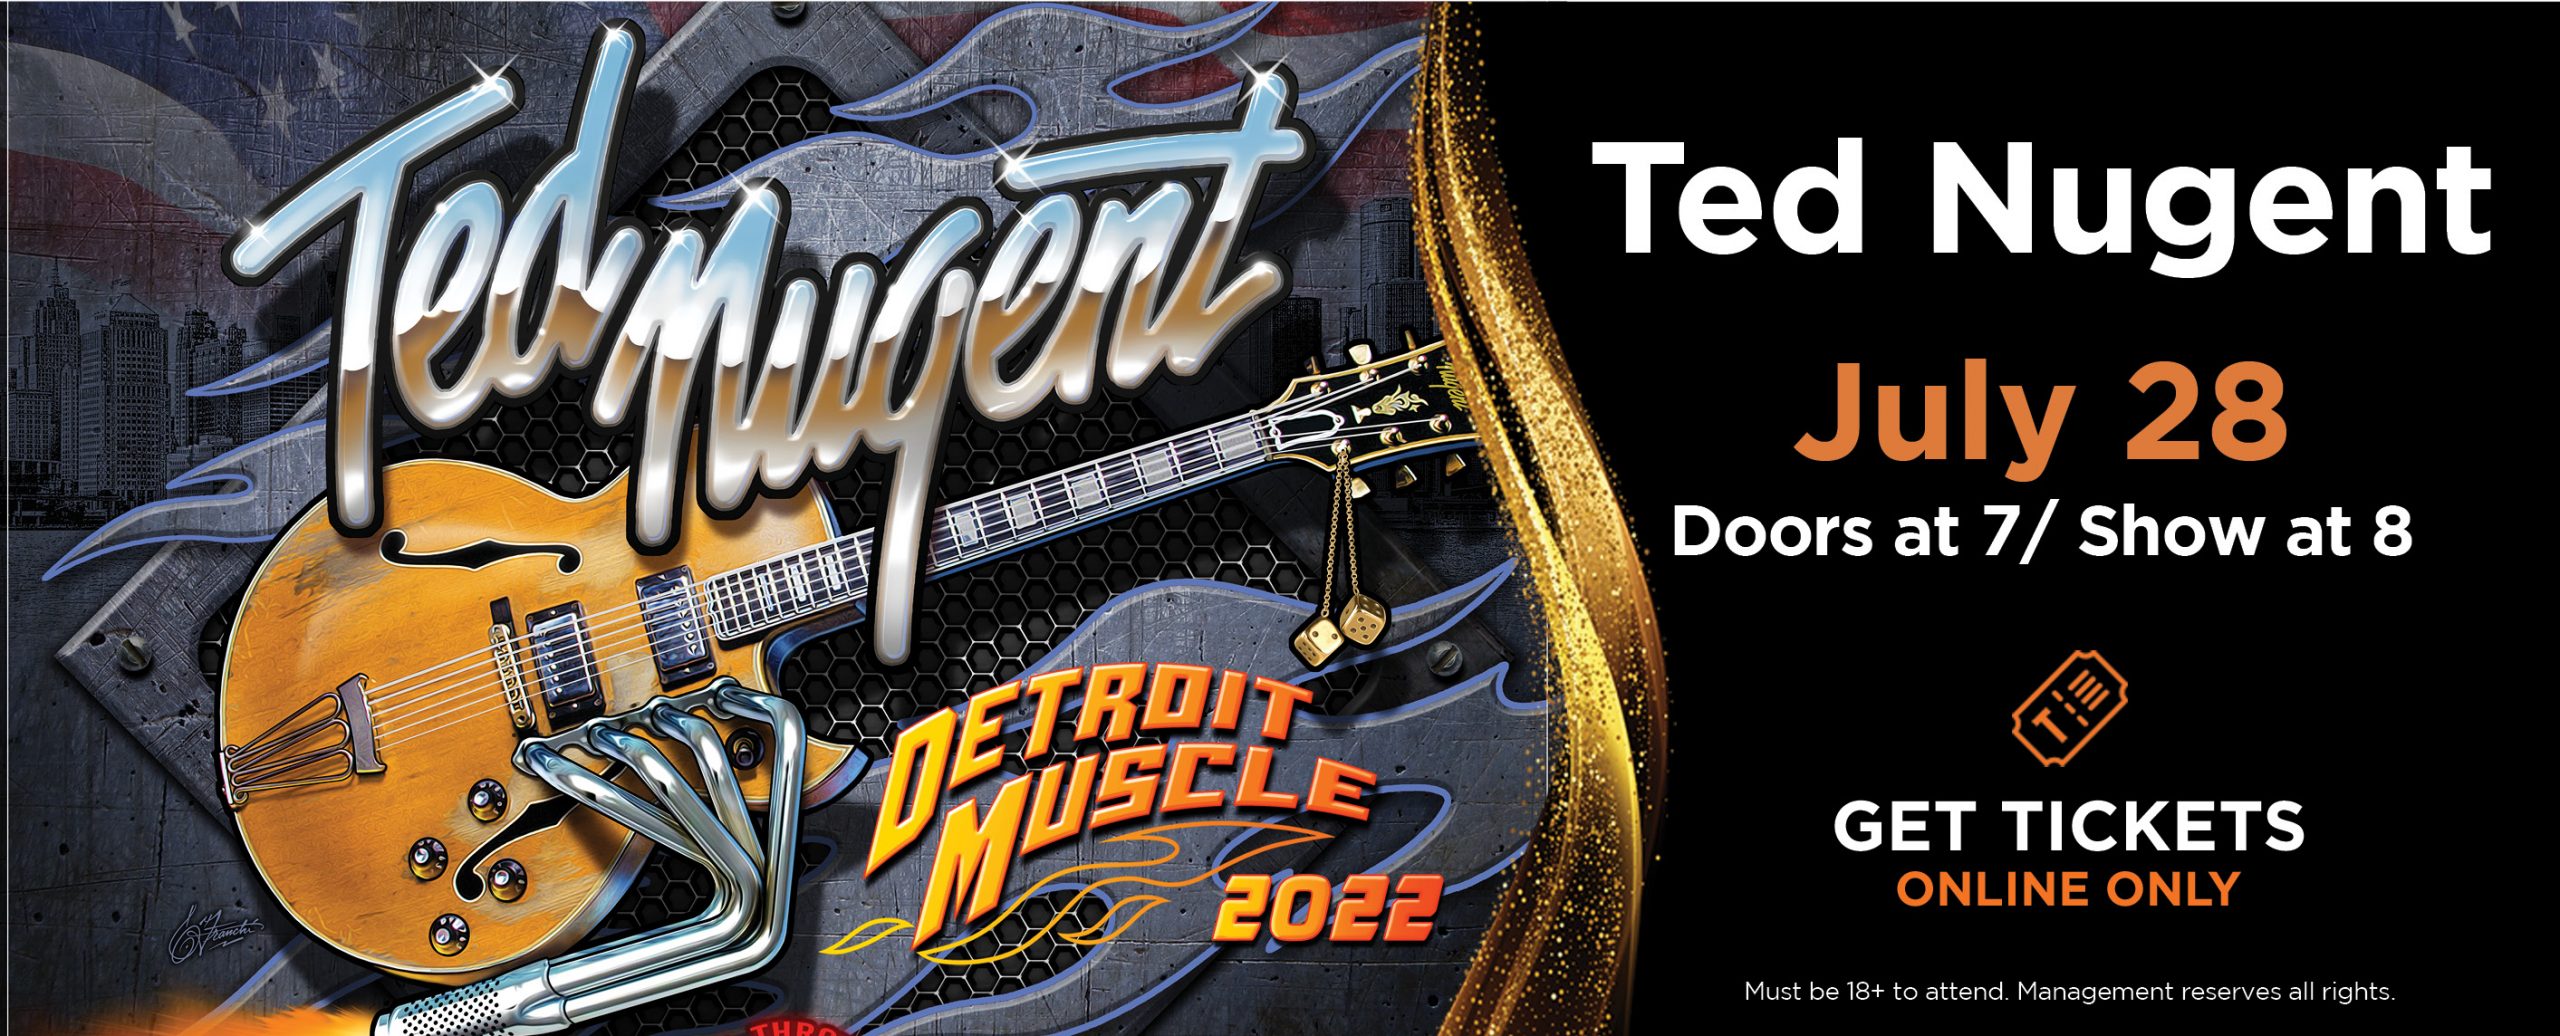 Ted Nugent - Jul 28, 2022 | Doors open 7pm, Show starts 8pm